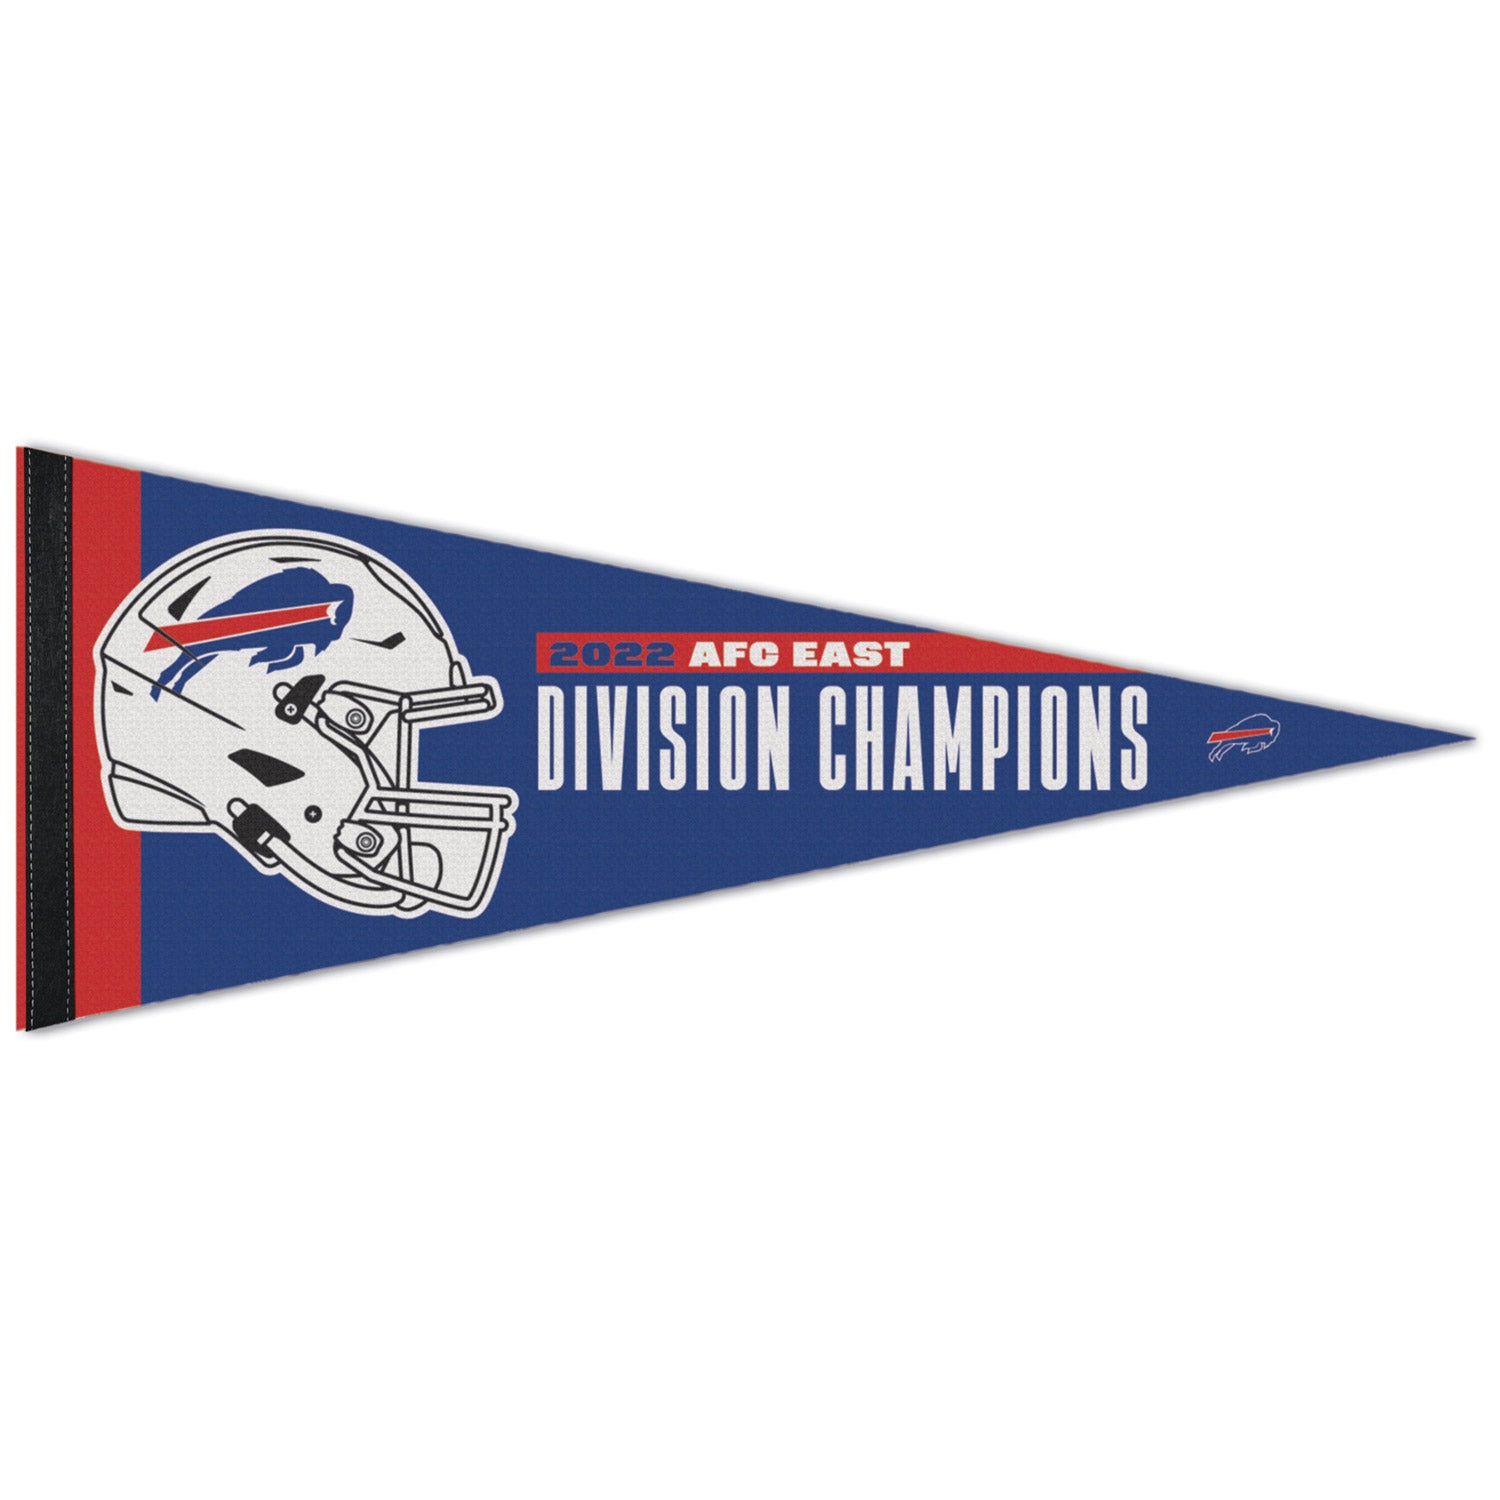 Wincraft Bills 2022 AFC East Division Champions 12x30 Premium Quality  Pennant